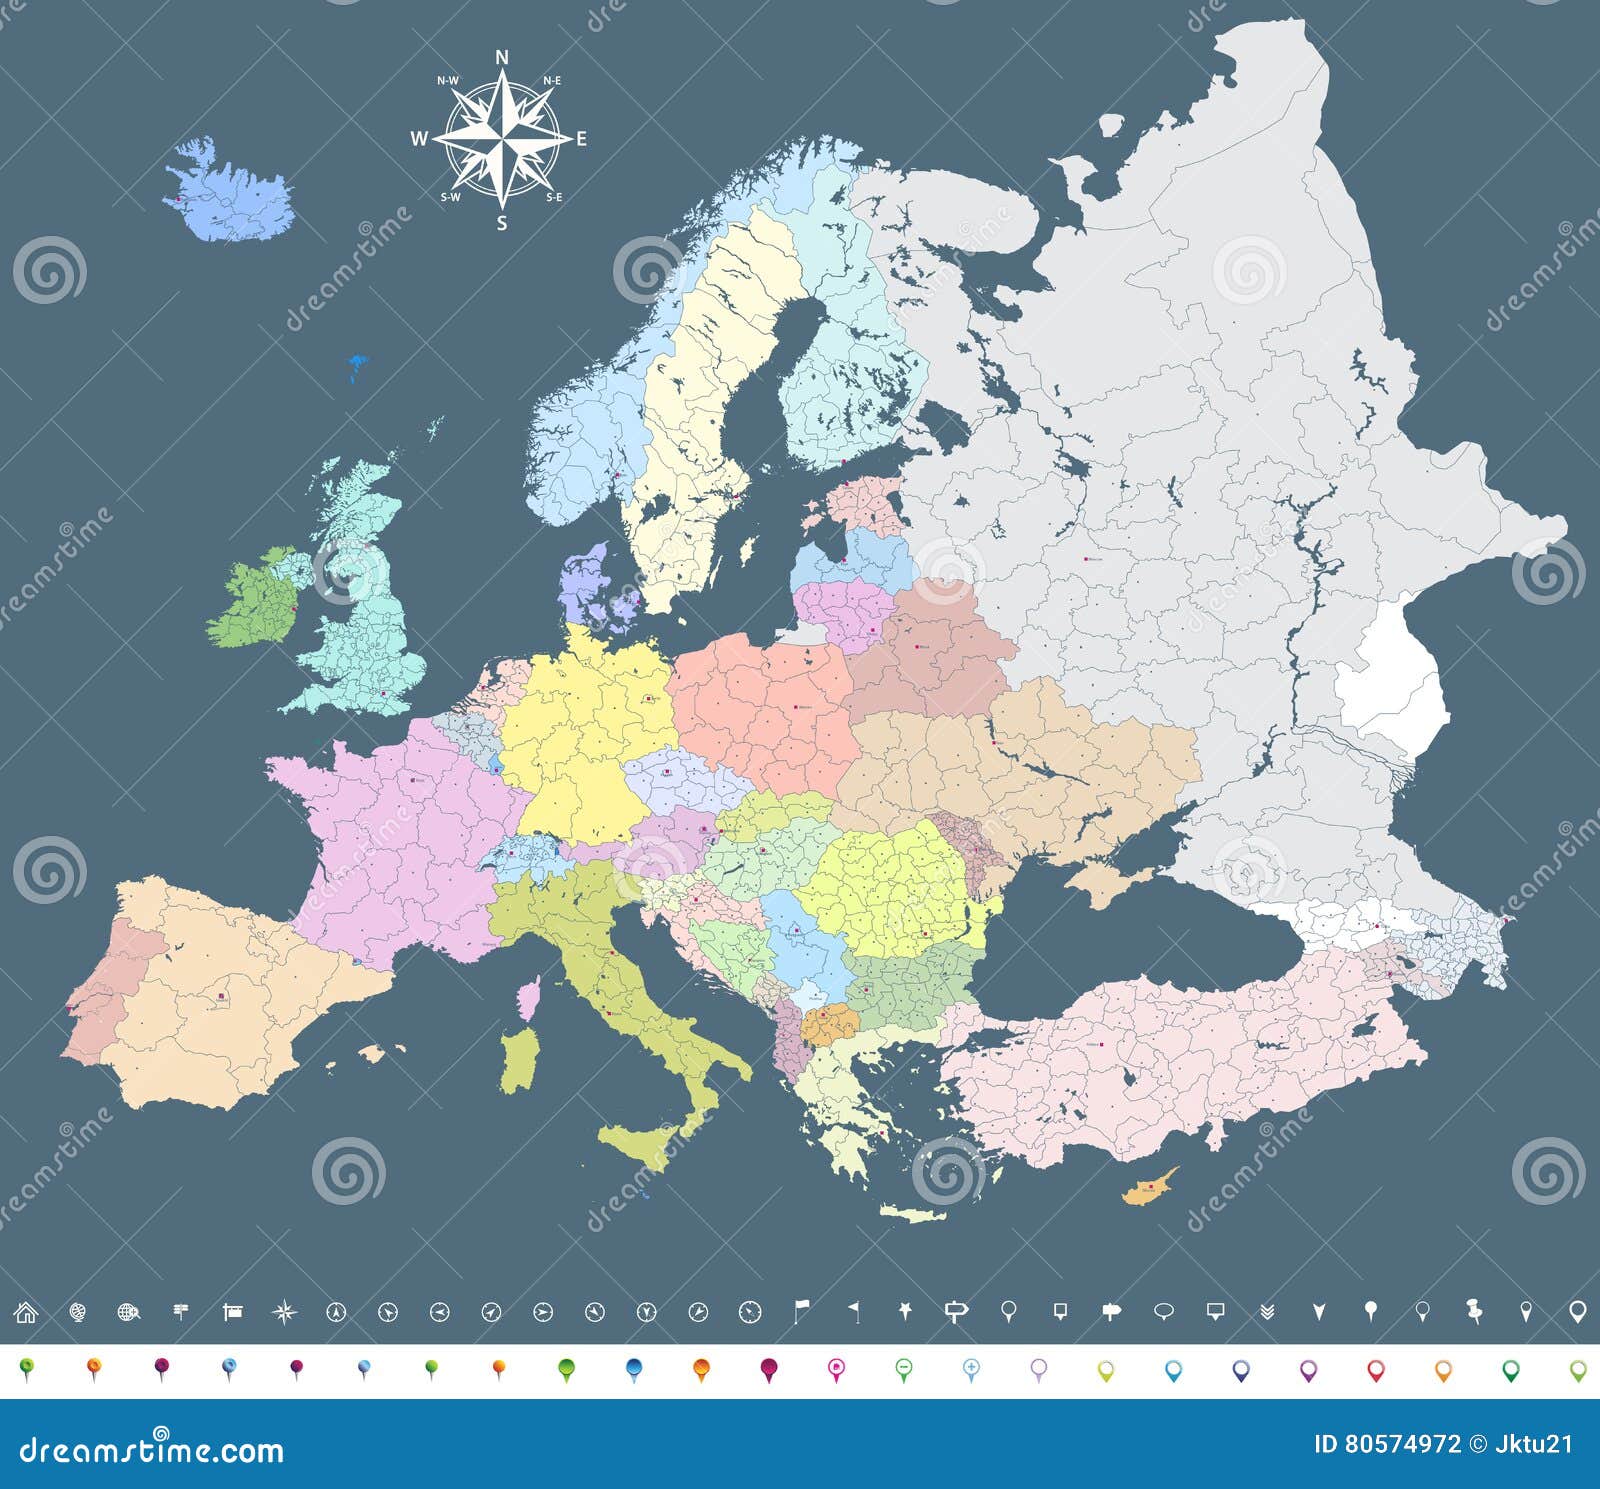 europe  colorful political map with regions borders and navigation icons